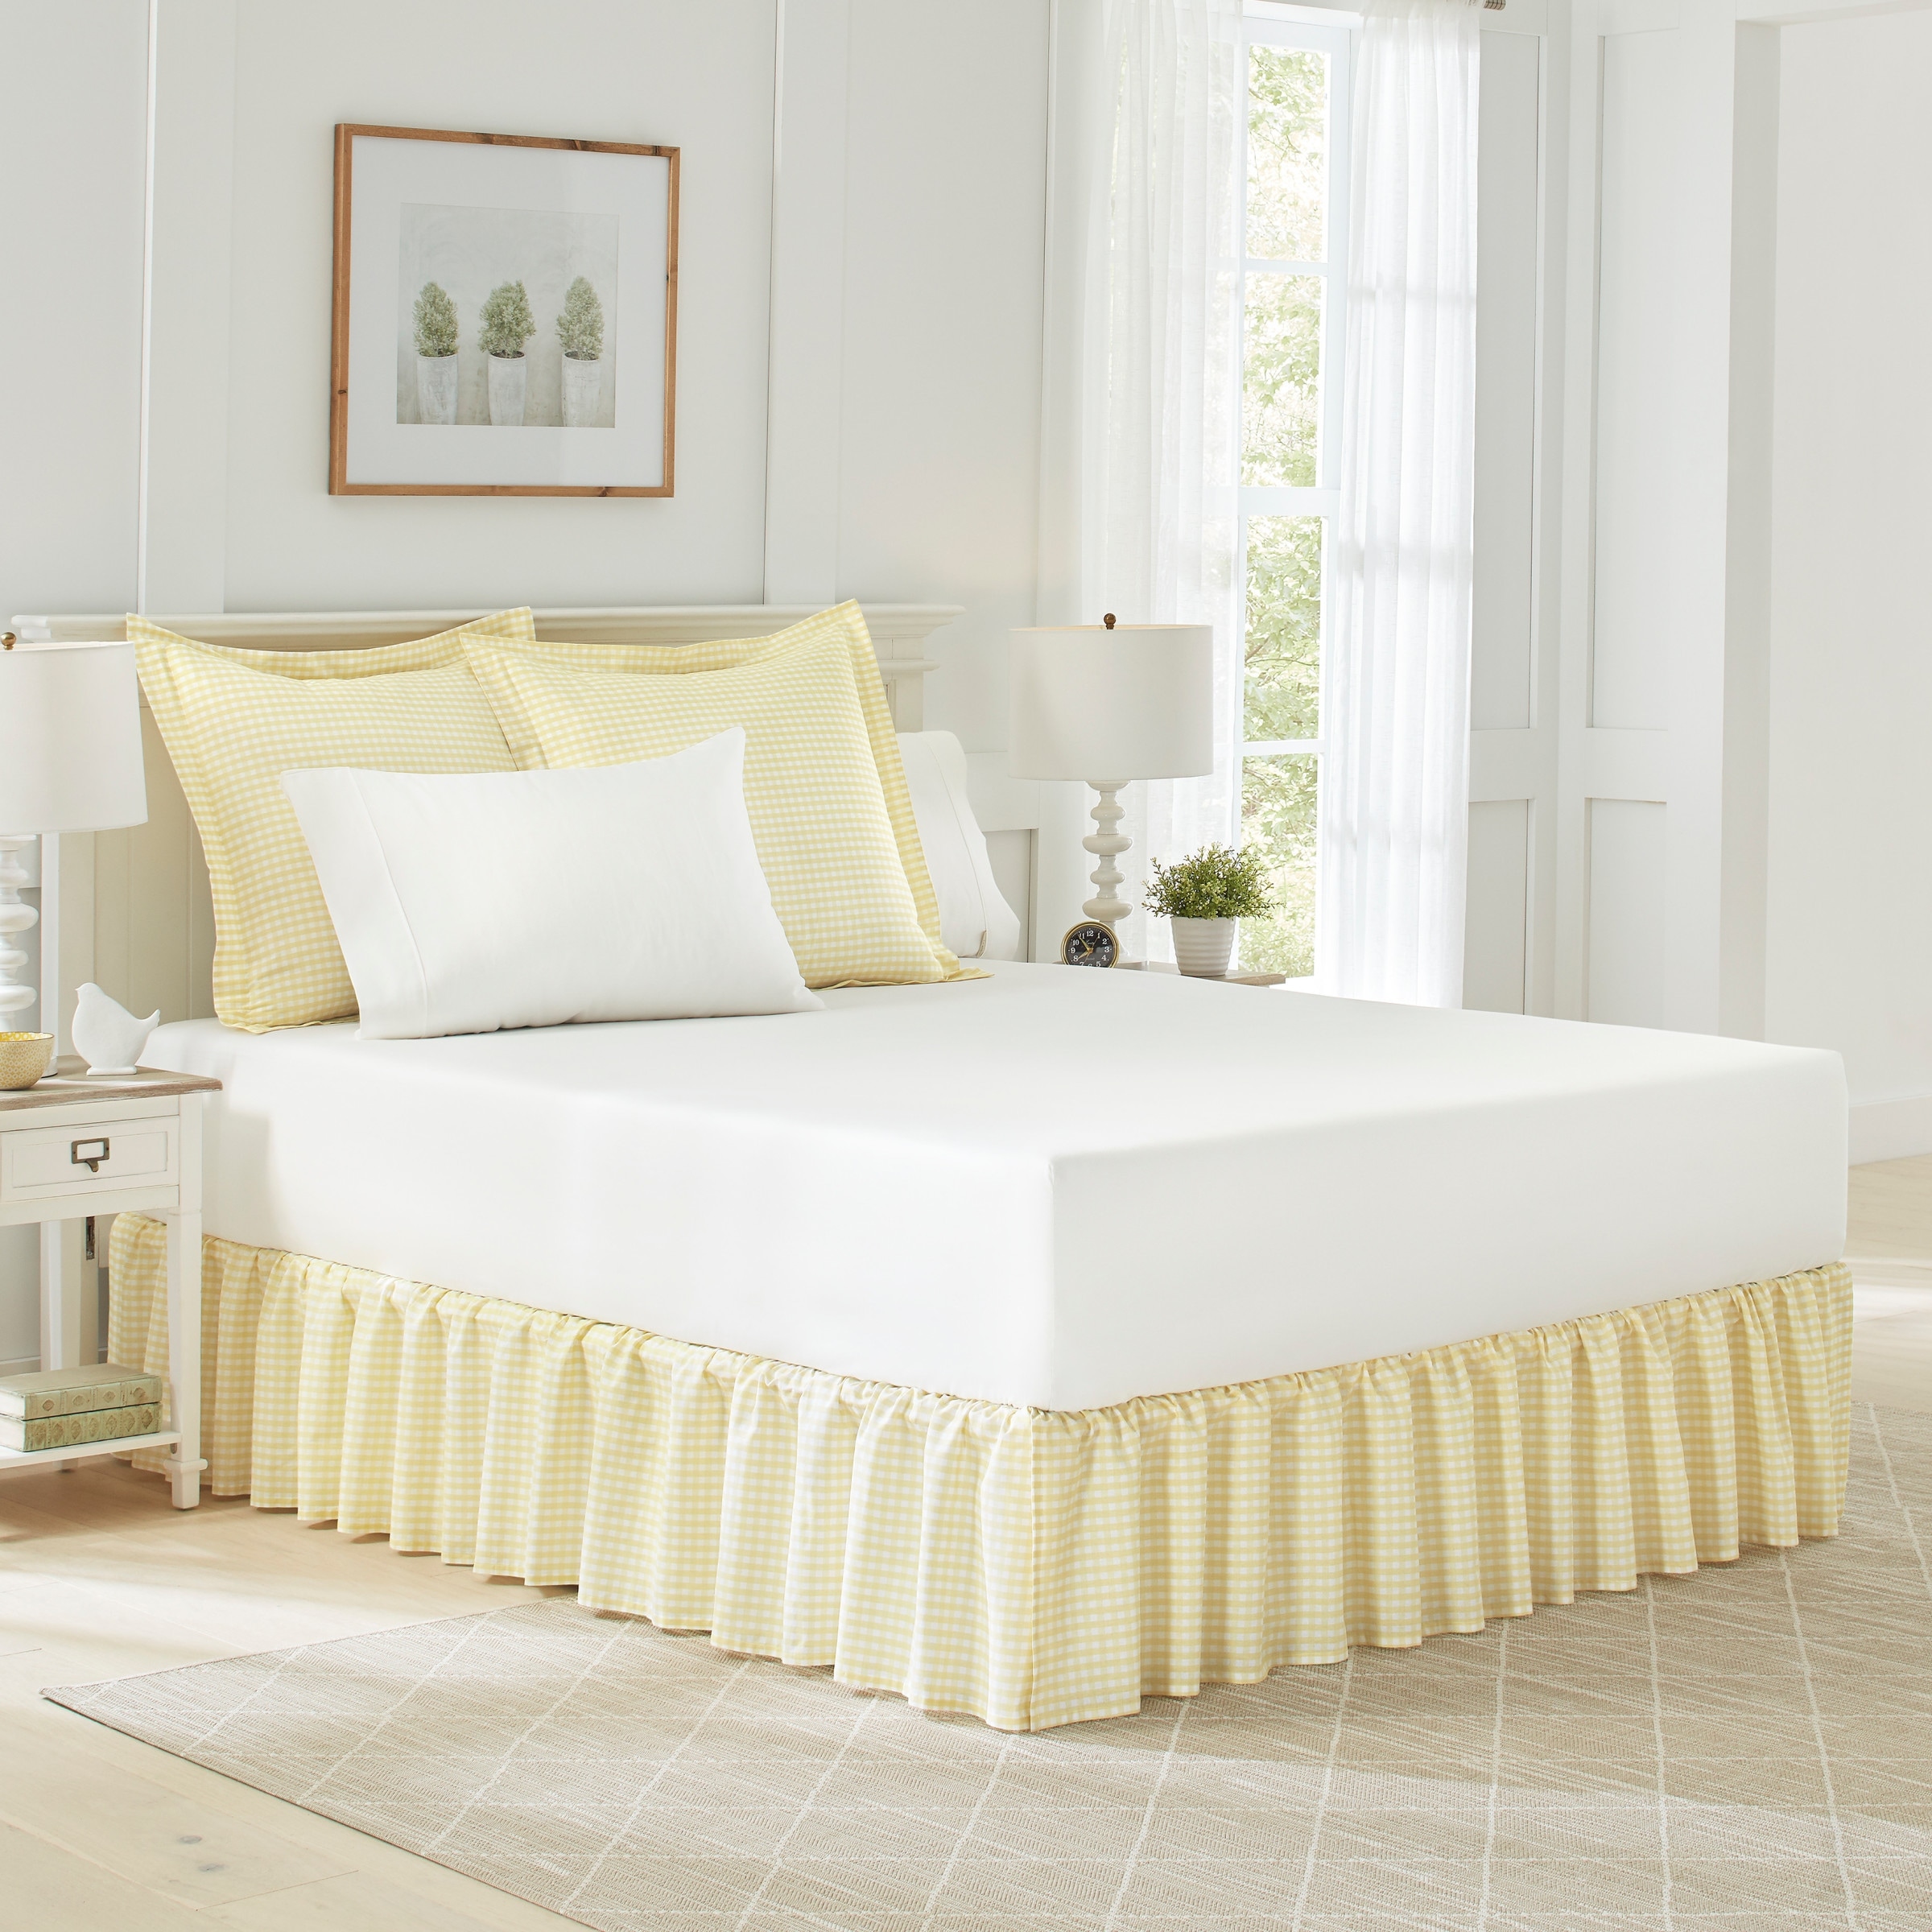 Laura Ashley Bed Skirts - Bed Bath & Beyond